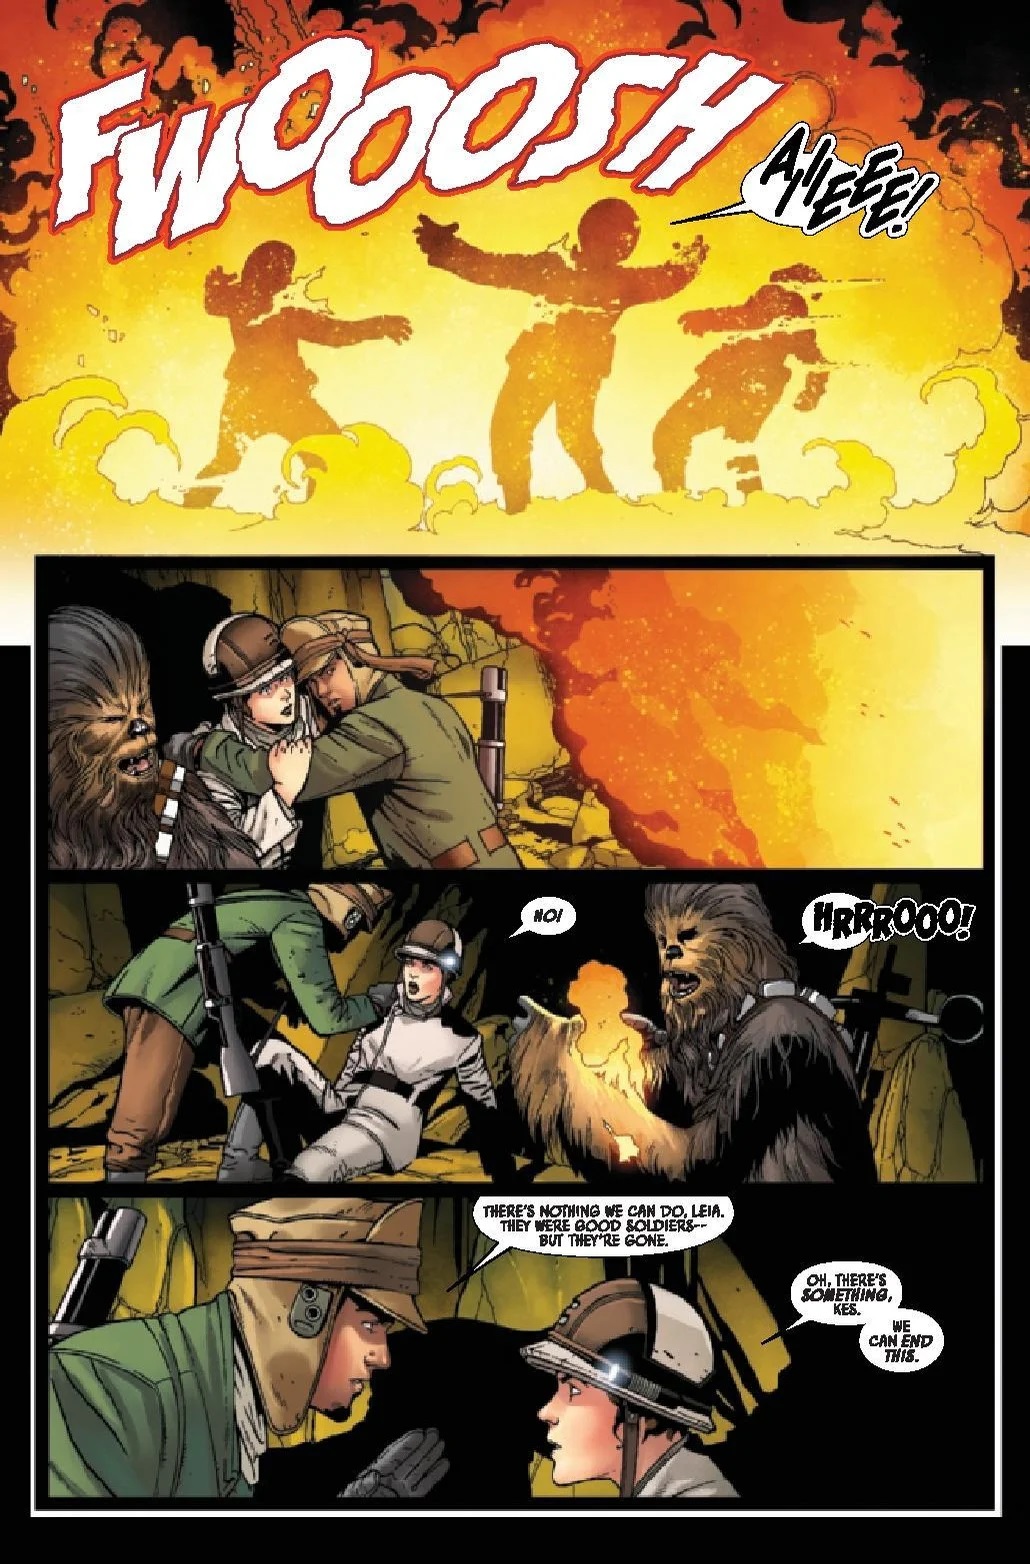 Star Wars #24 Preview 5